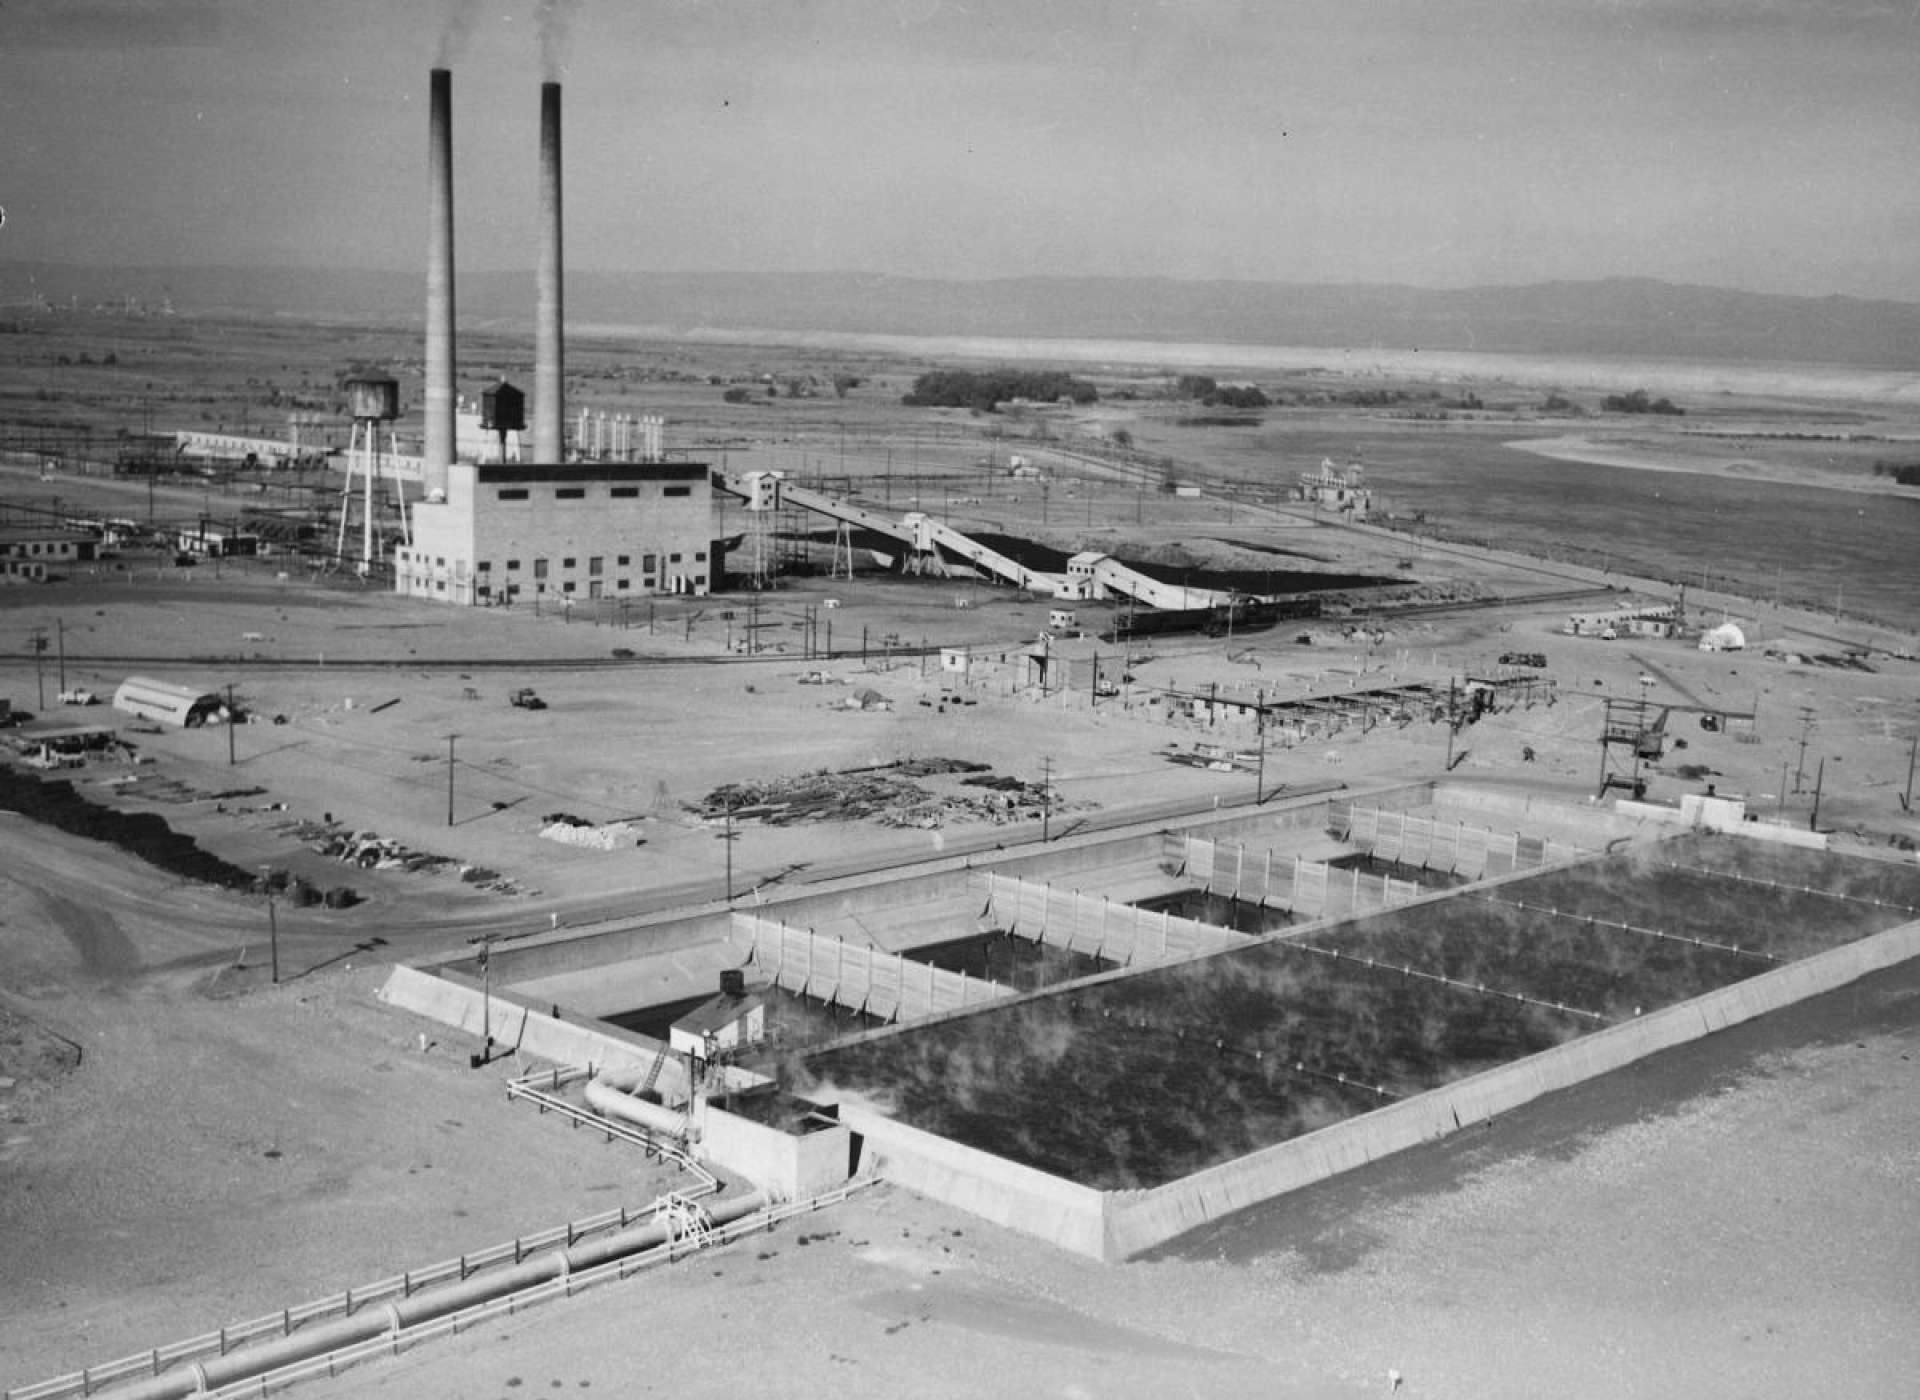 An aerial view (ca 1945) of the Hanford site, over the retention basins where water was cooled after it had flowed over the reactor (building in the background). After the water cooled to ambient temperature it was returned to the Columbia River, which can be seen in the upper right of the image. (from the archives of the Department of Energy)